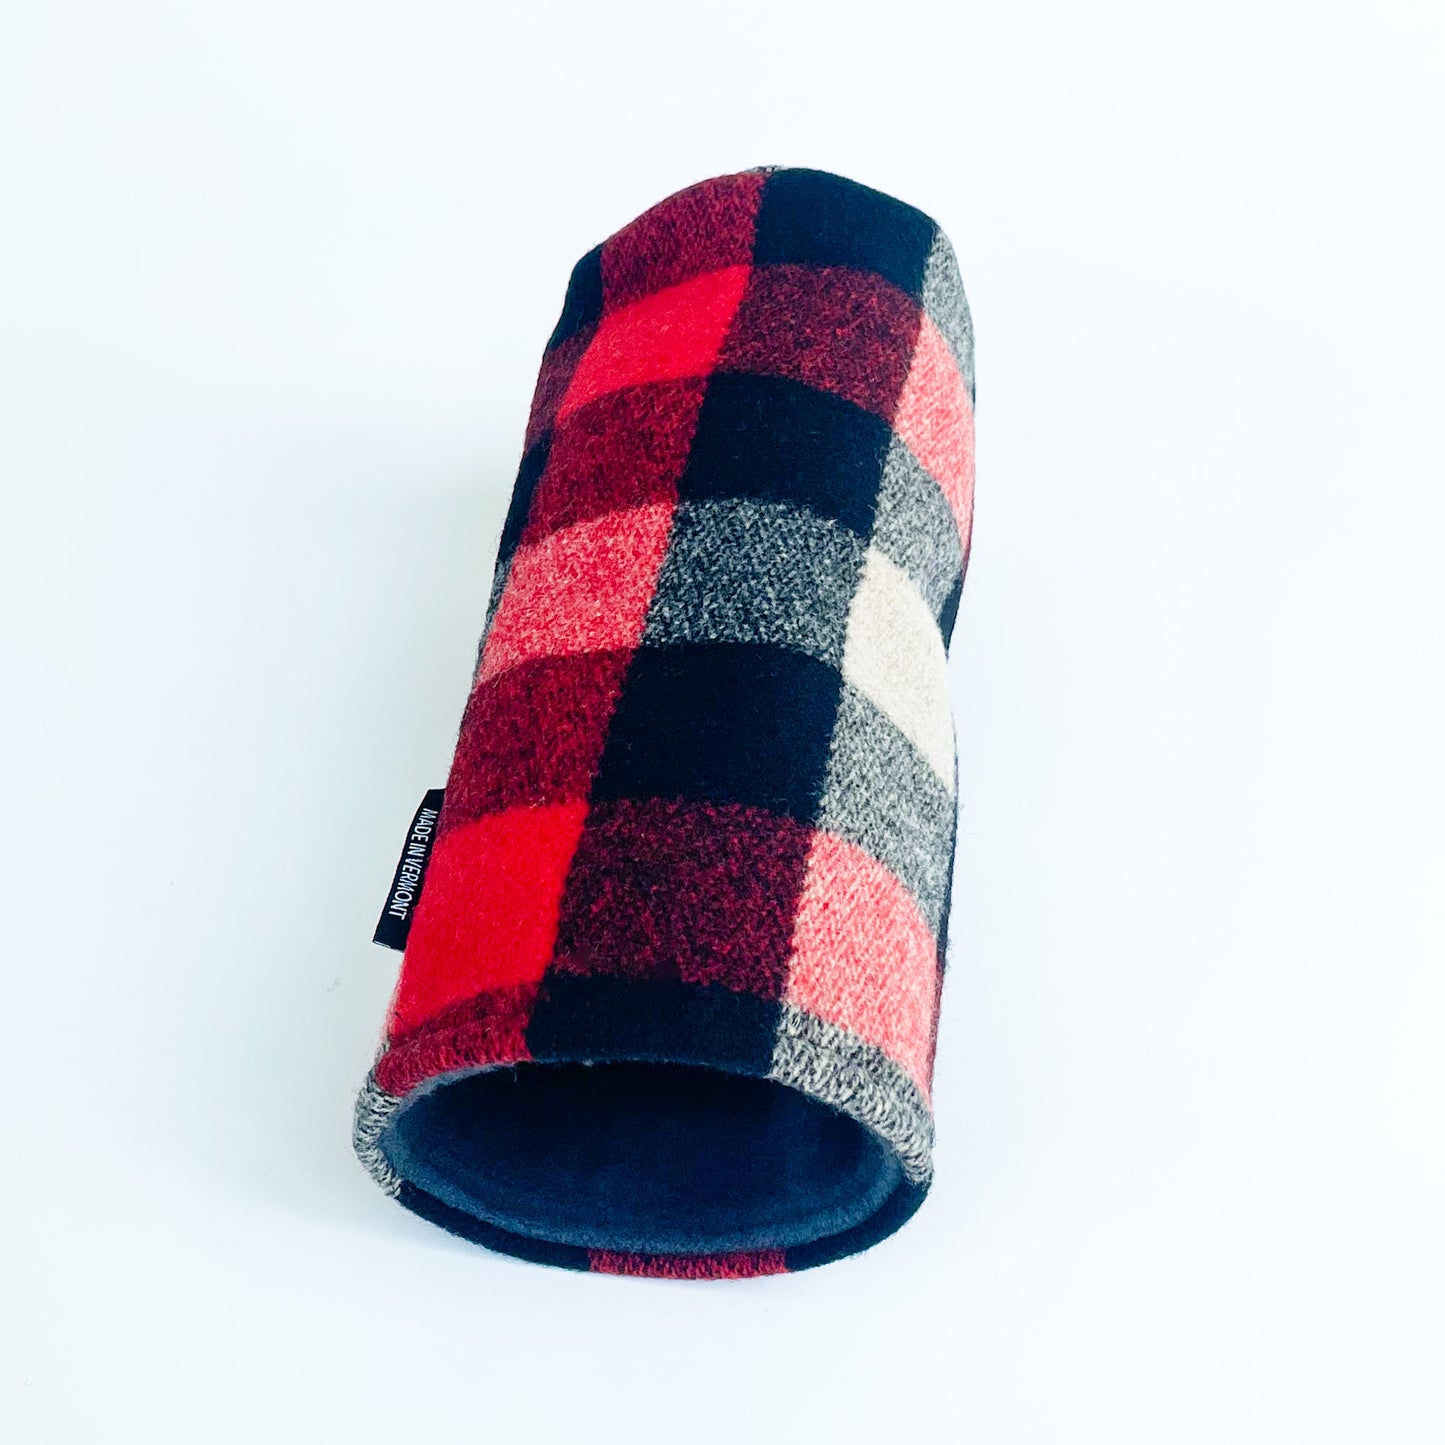 Red, black, and ivory buffalo check wool driver headcover shown with interior fleece lining